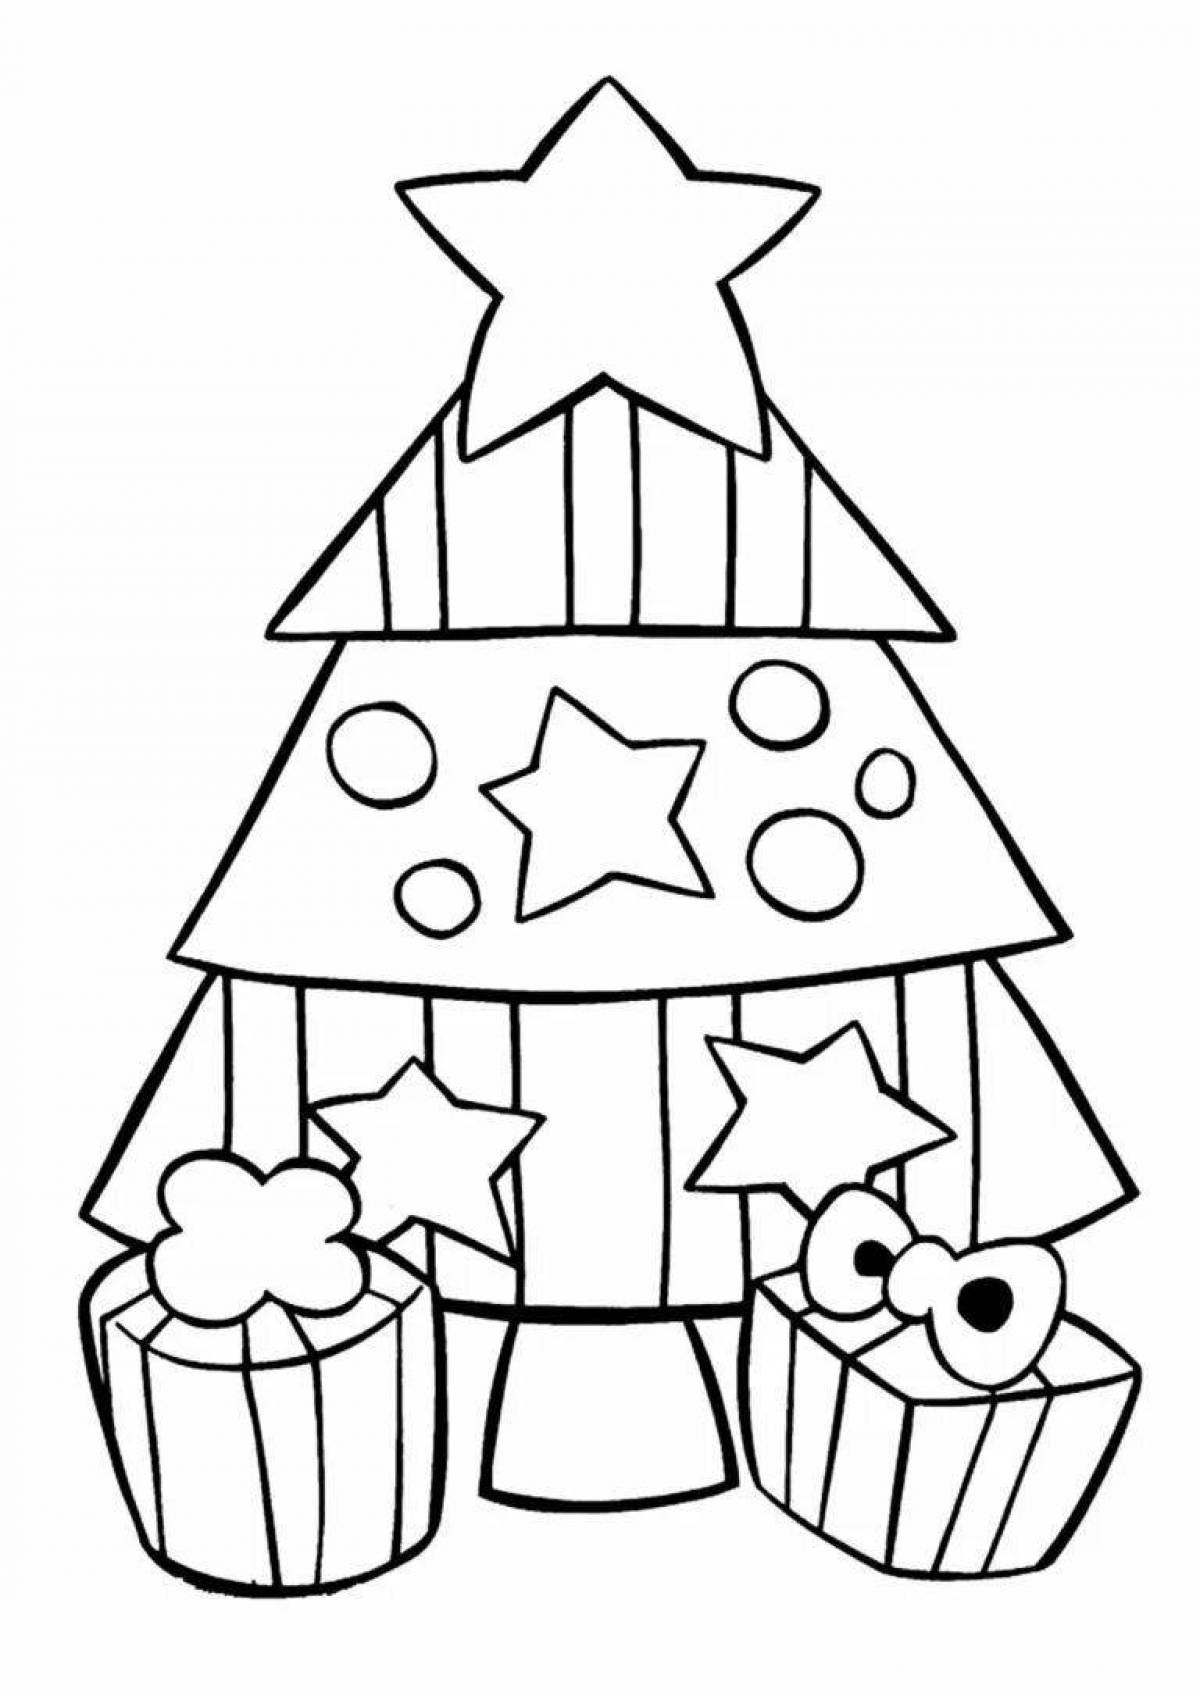 Exuberant Christmas coloring book for 3-4 year olds